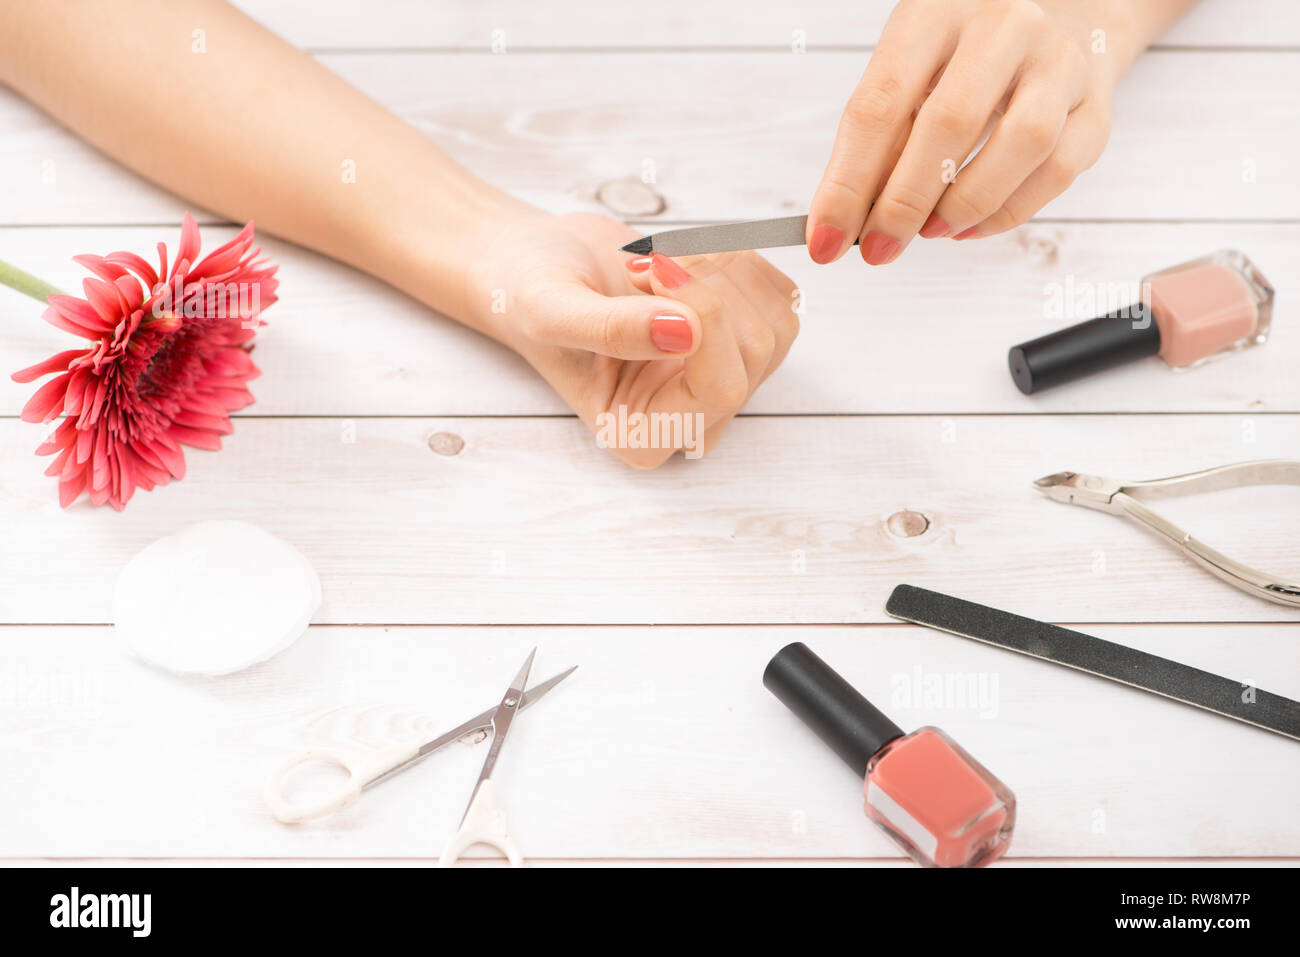 Woman Hand Care. Closeup Of Beautiful Female Hands Having Spa Manicure At Beauty Salon. Beautician Filing Clients Healthy Natural Nails With Nail File Stock Photo